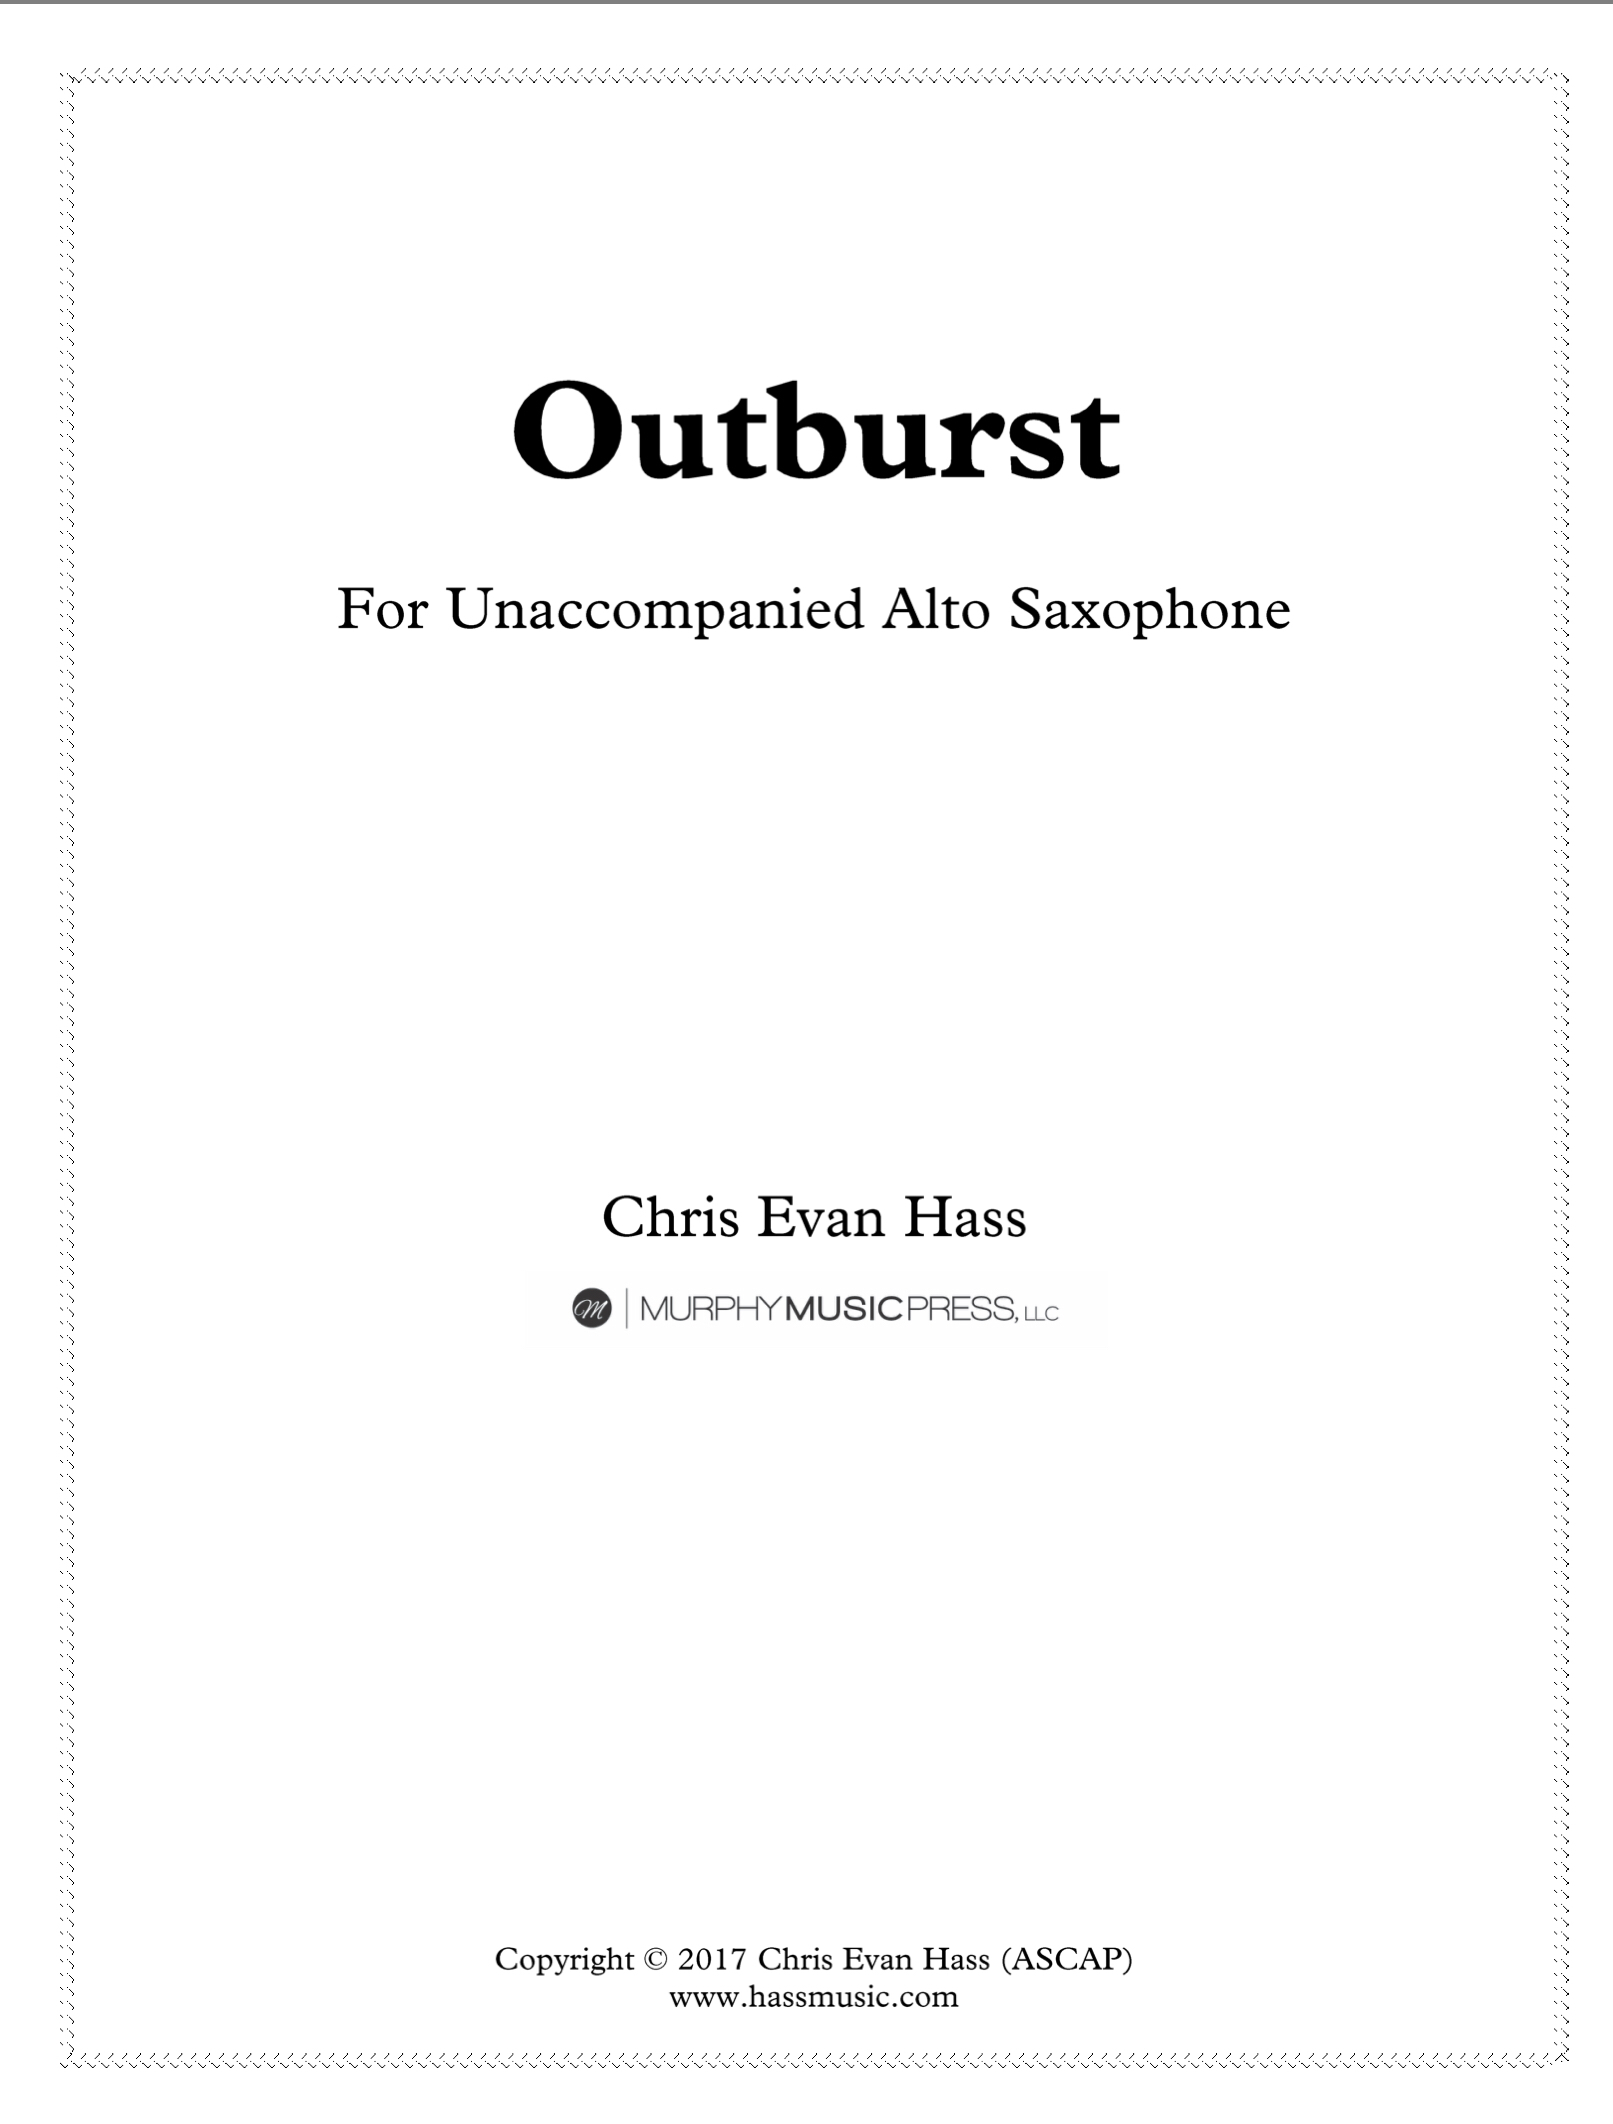 Outburst by Chris Hass